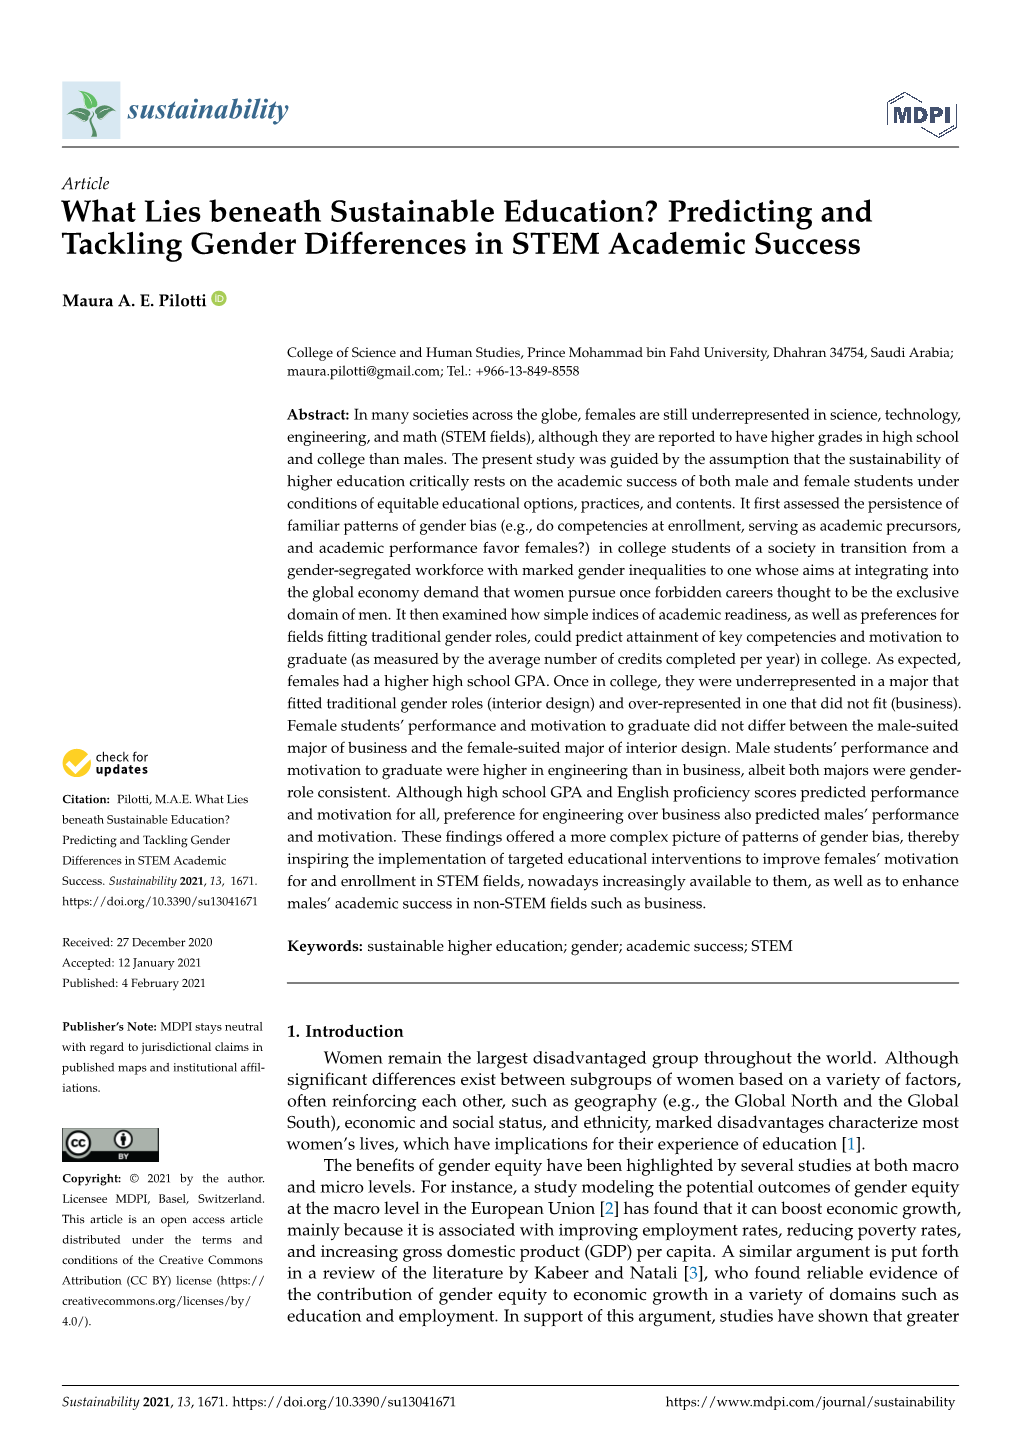 What Lies Beneath Sustainable Education? Predicting and Tackling Gender Differences in STEM Academic Success